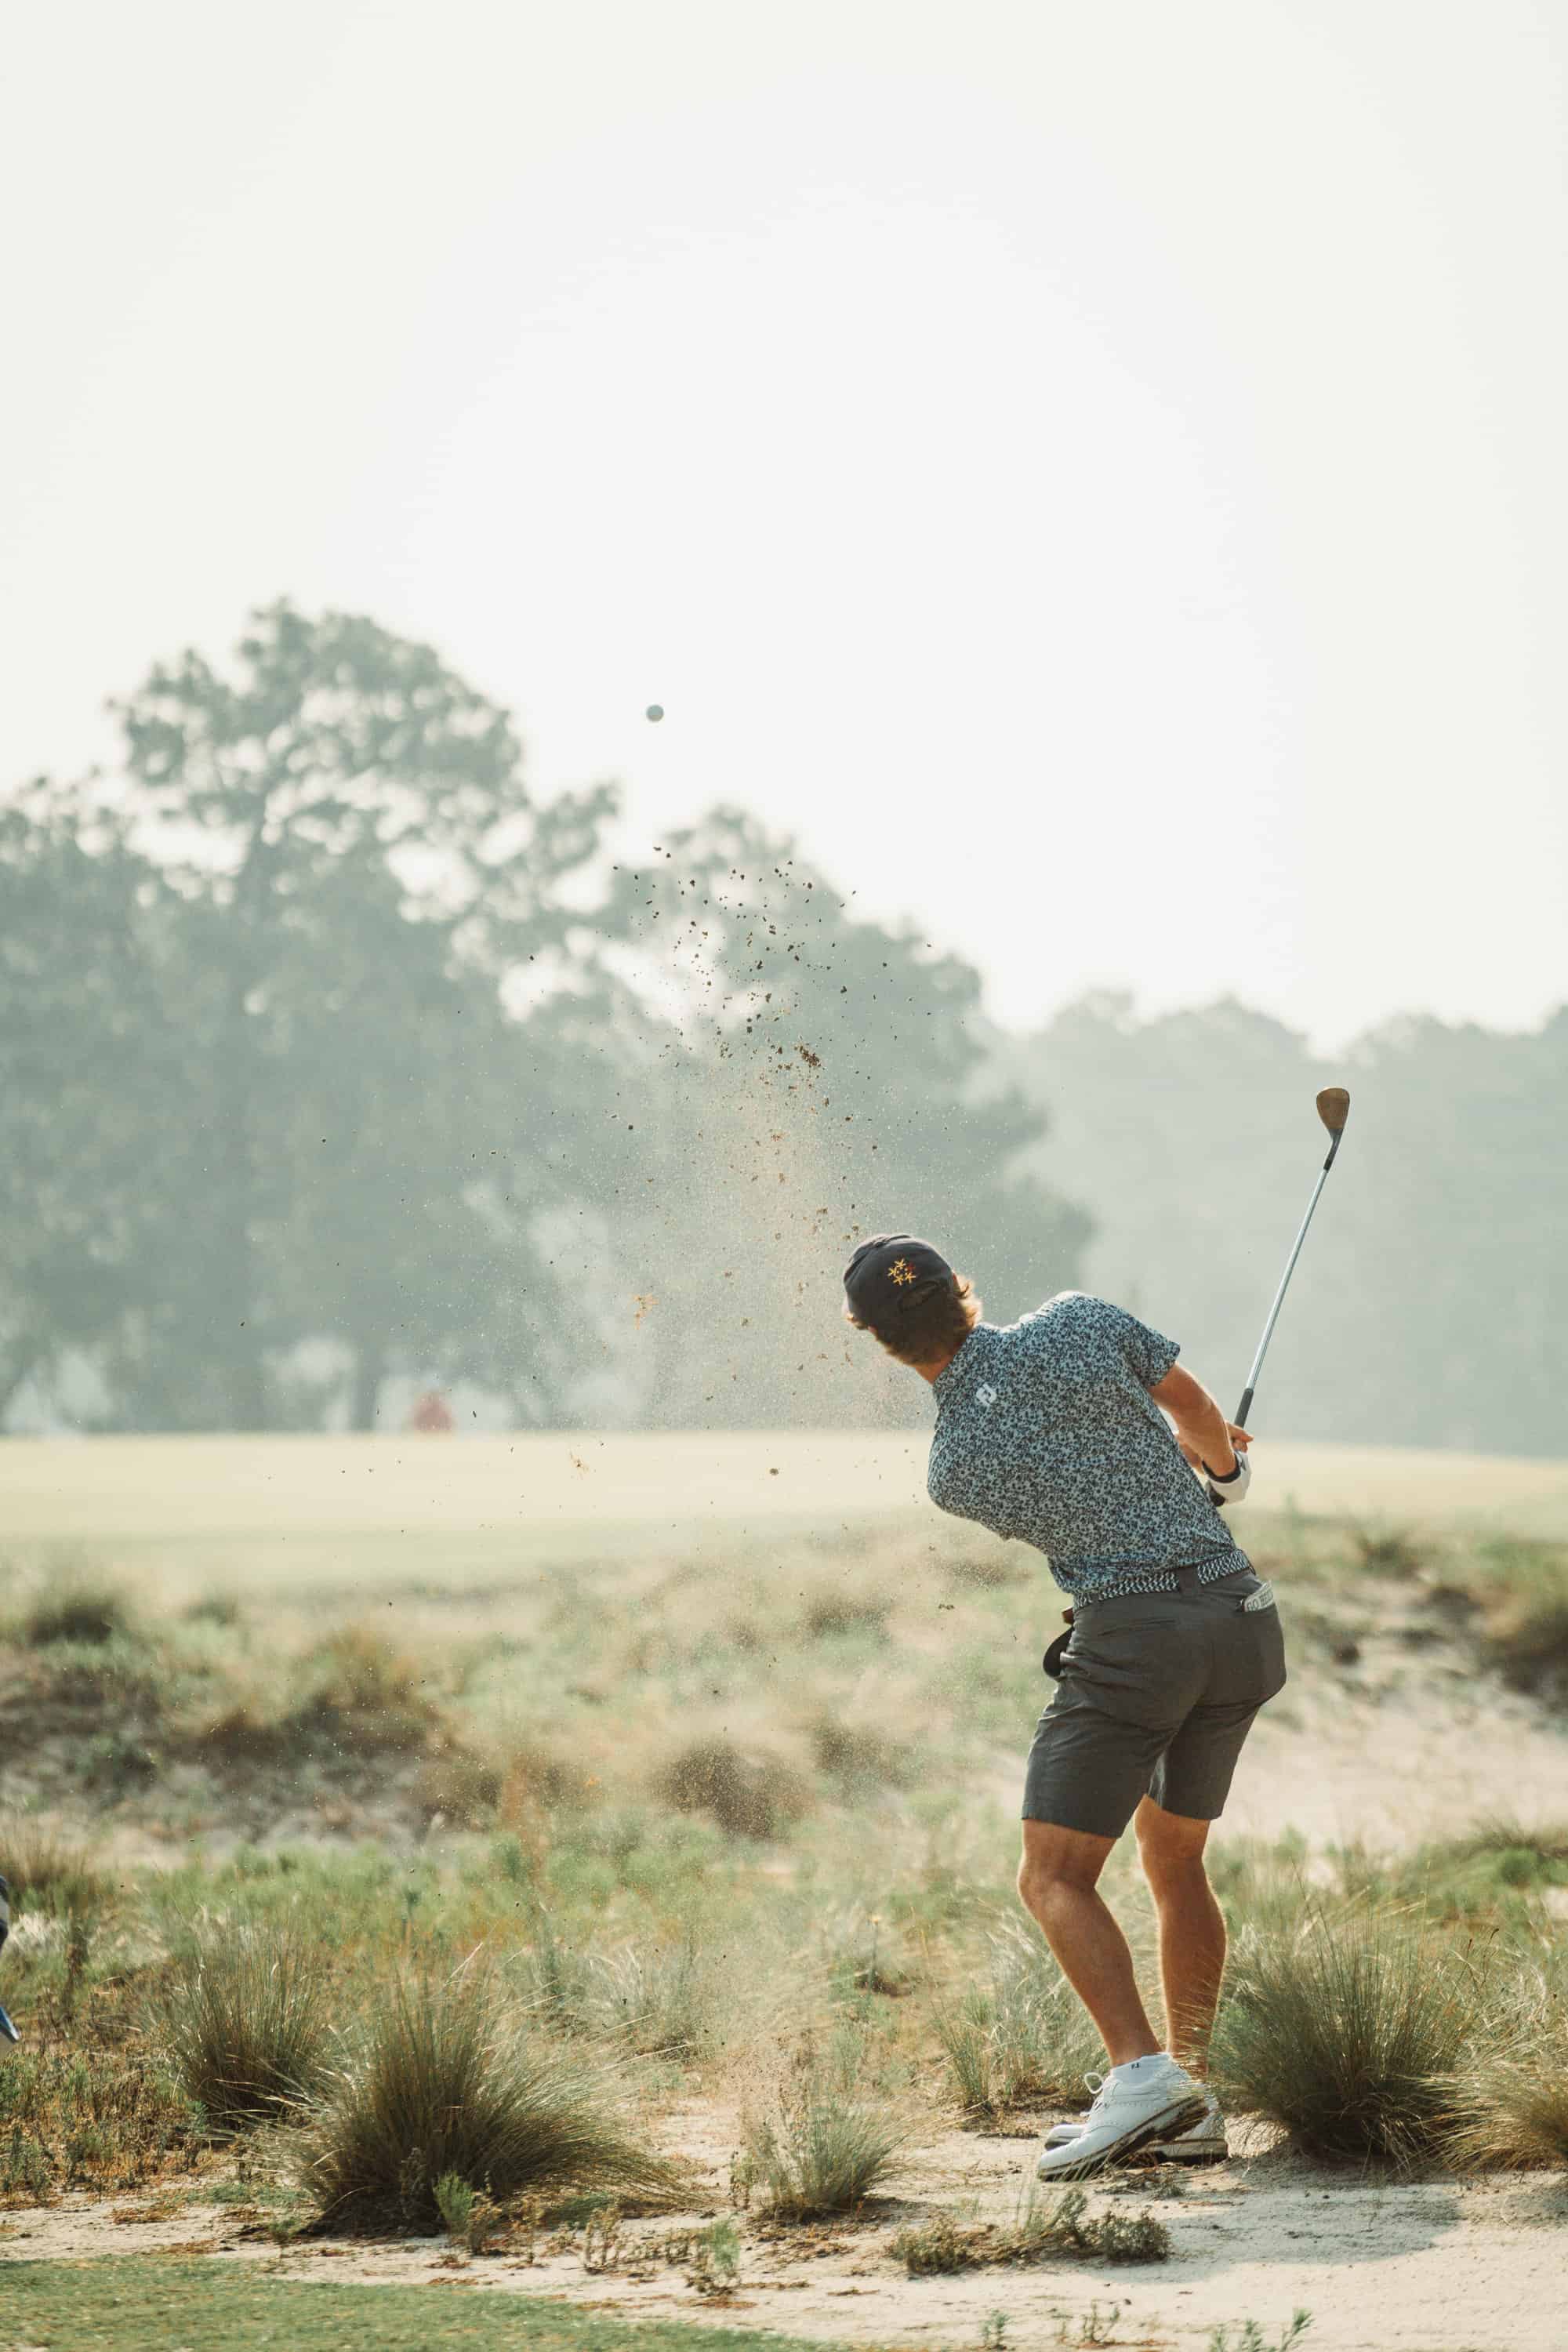 David Ford plays from the native area on Pinehurst No. 2. (Photo by Zach Pessagno)